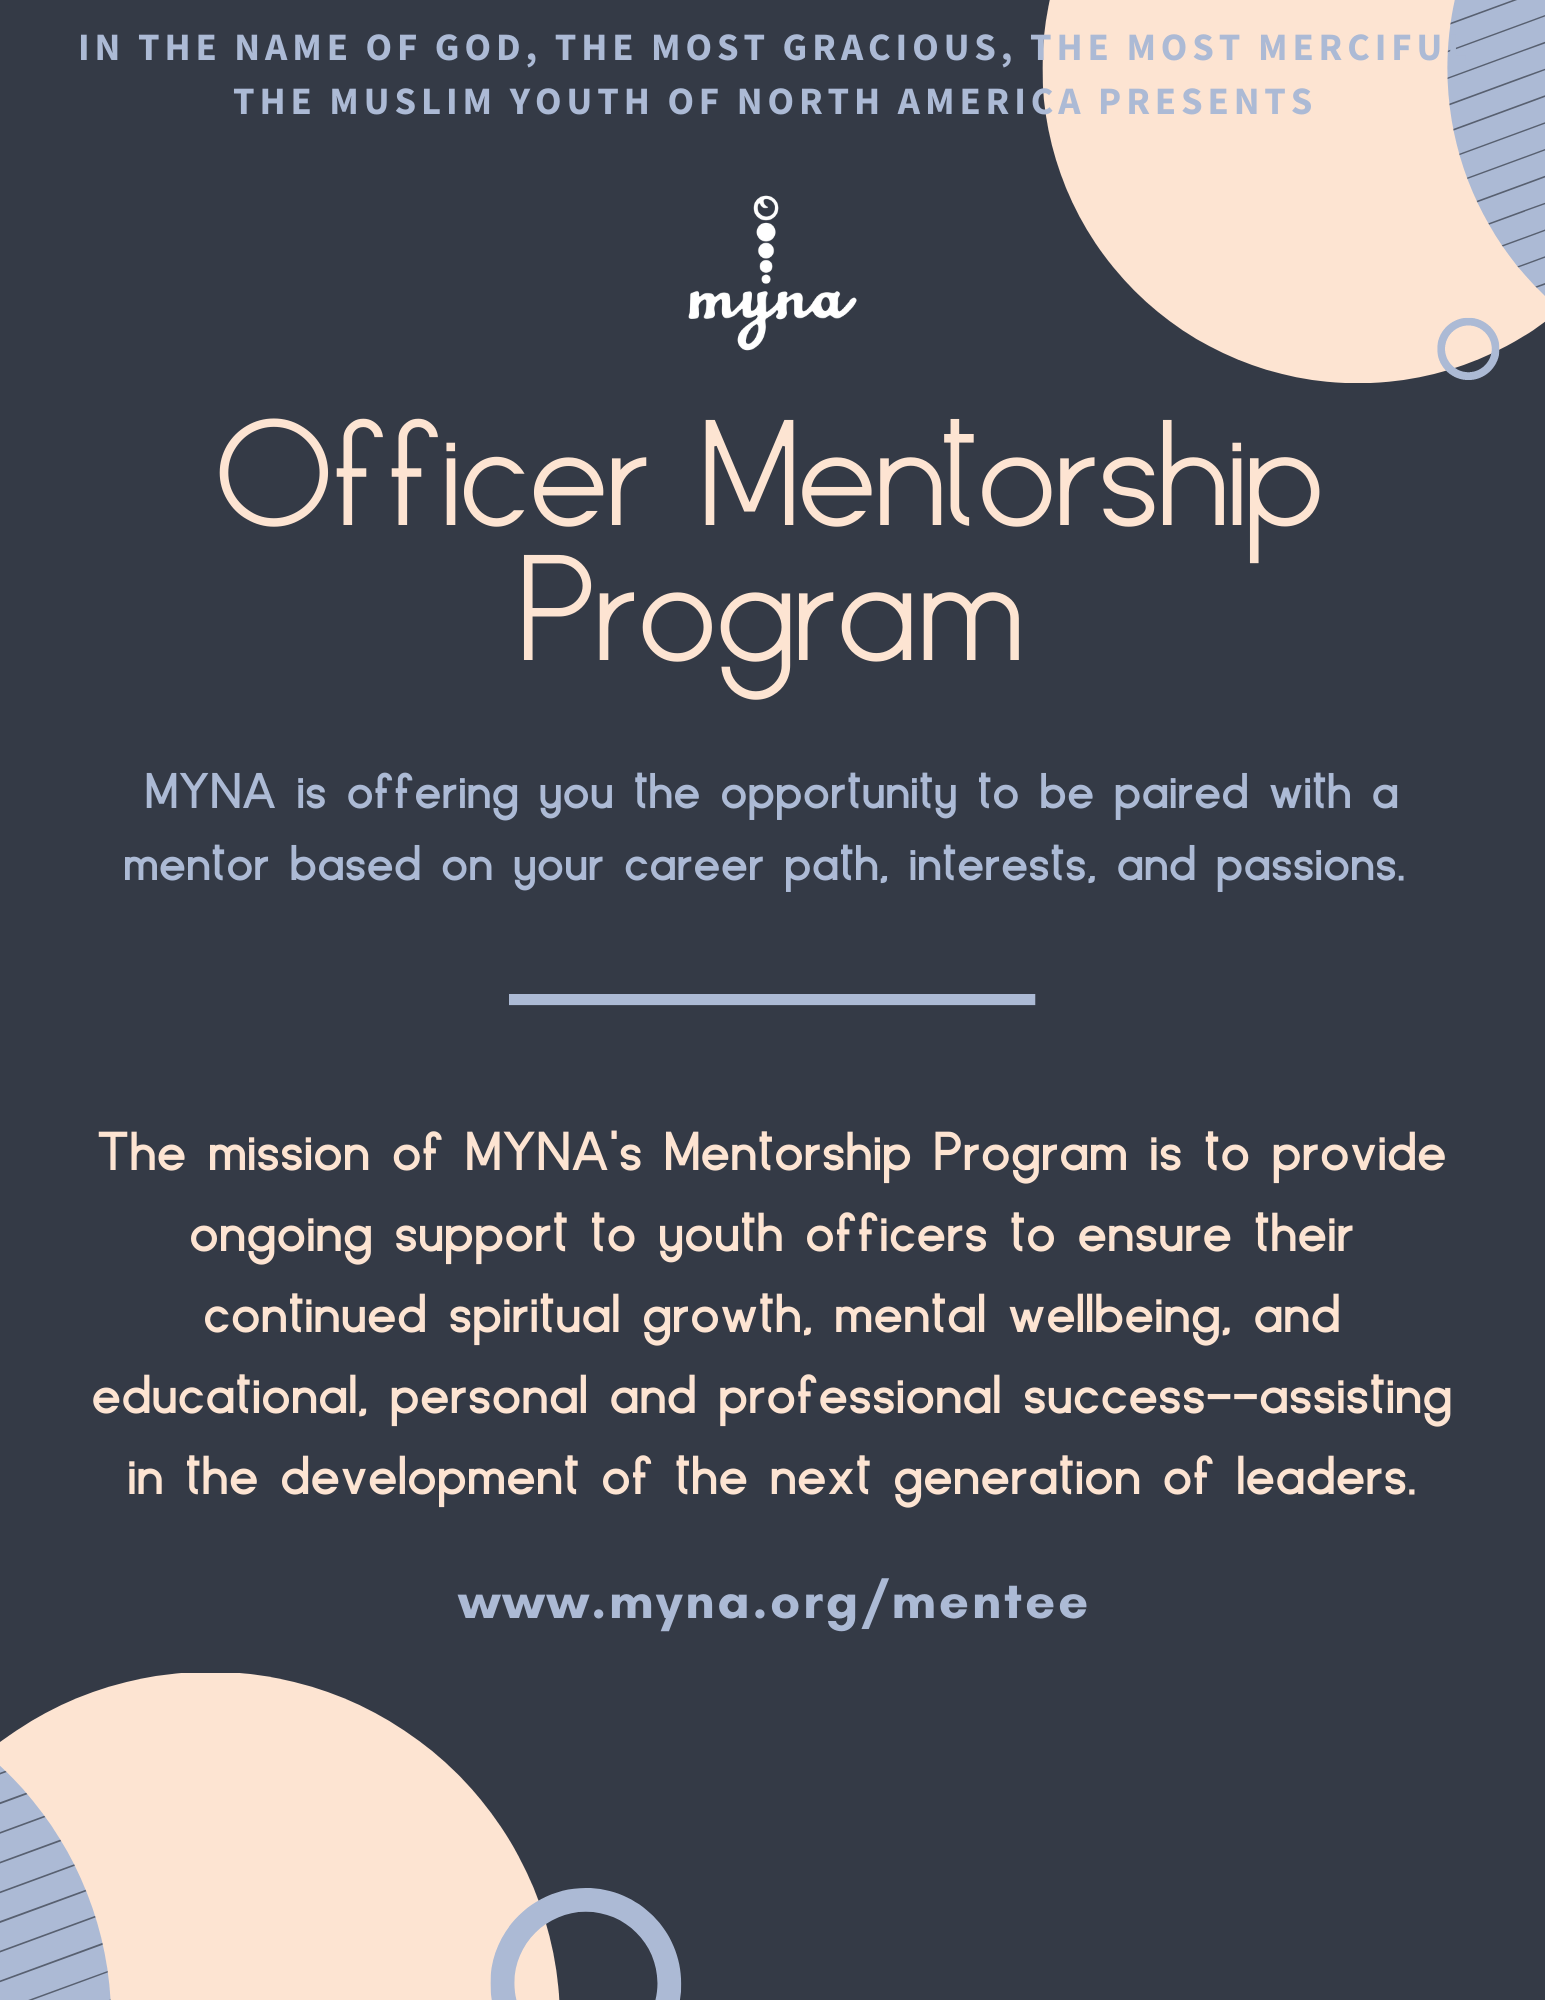 Opera velordnet annoncere Mentorship - Mentee — Muslim Youth of North America